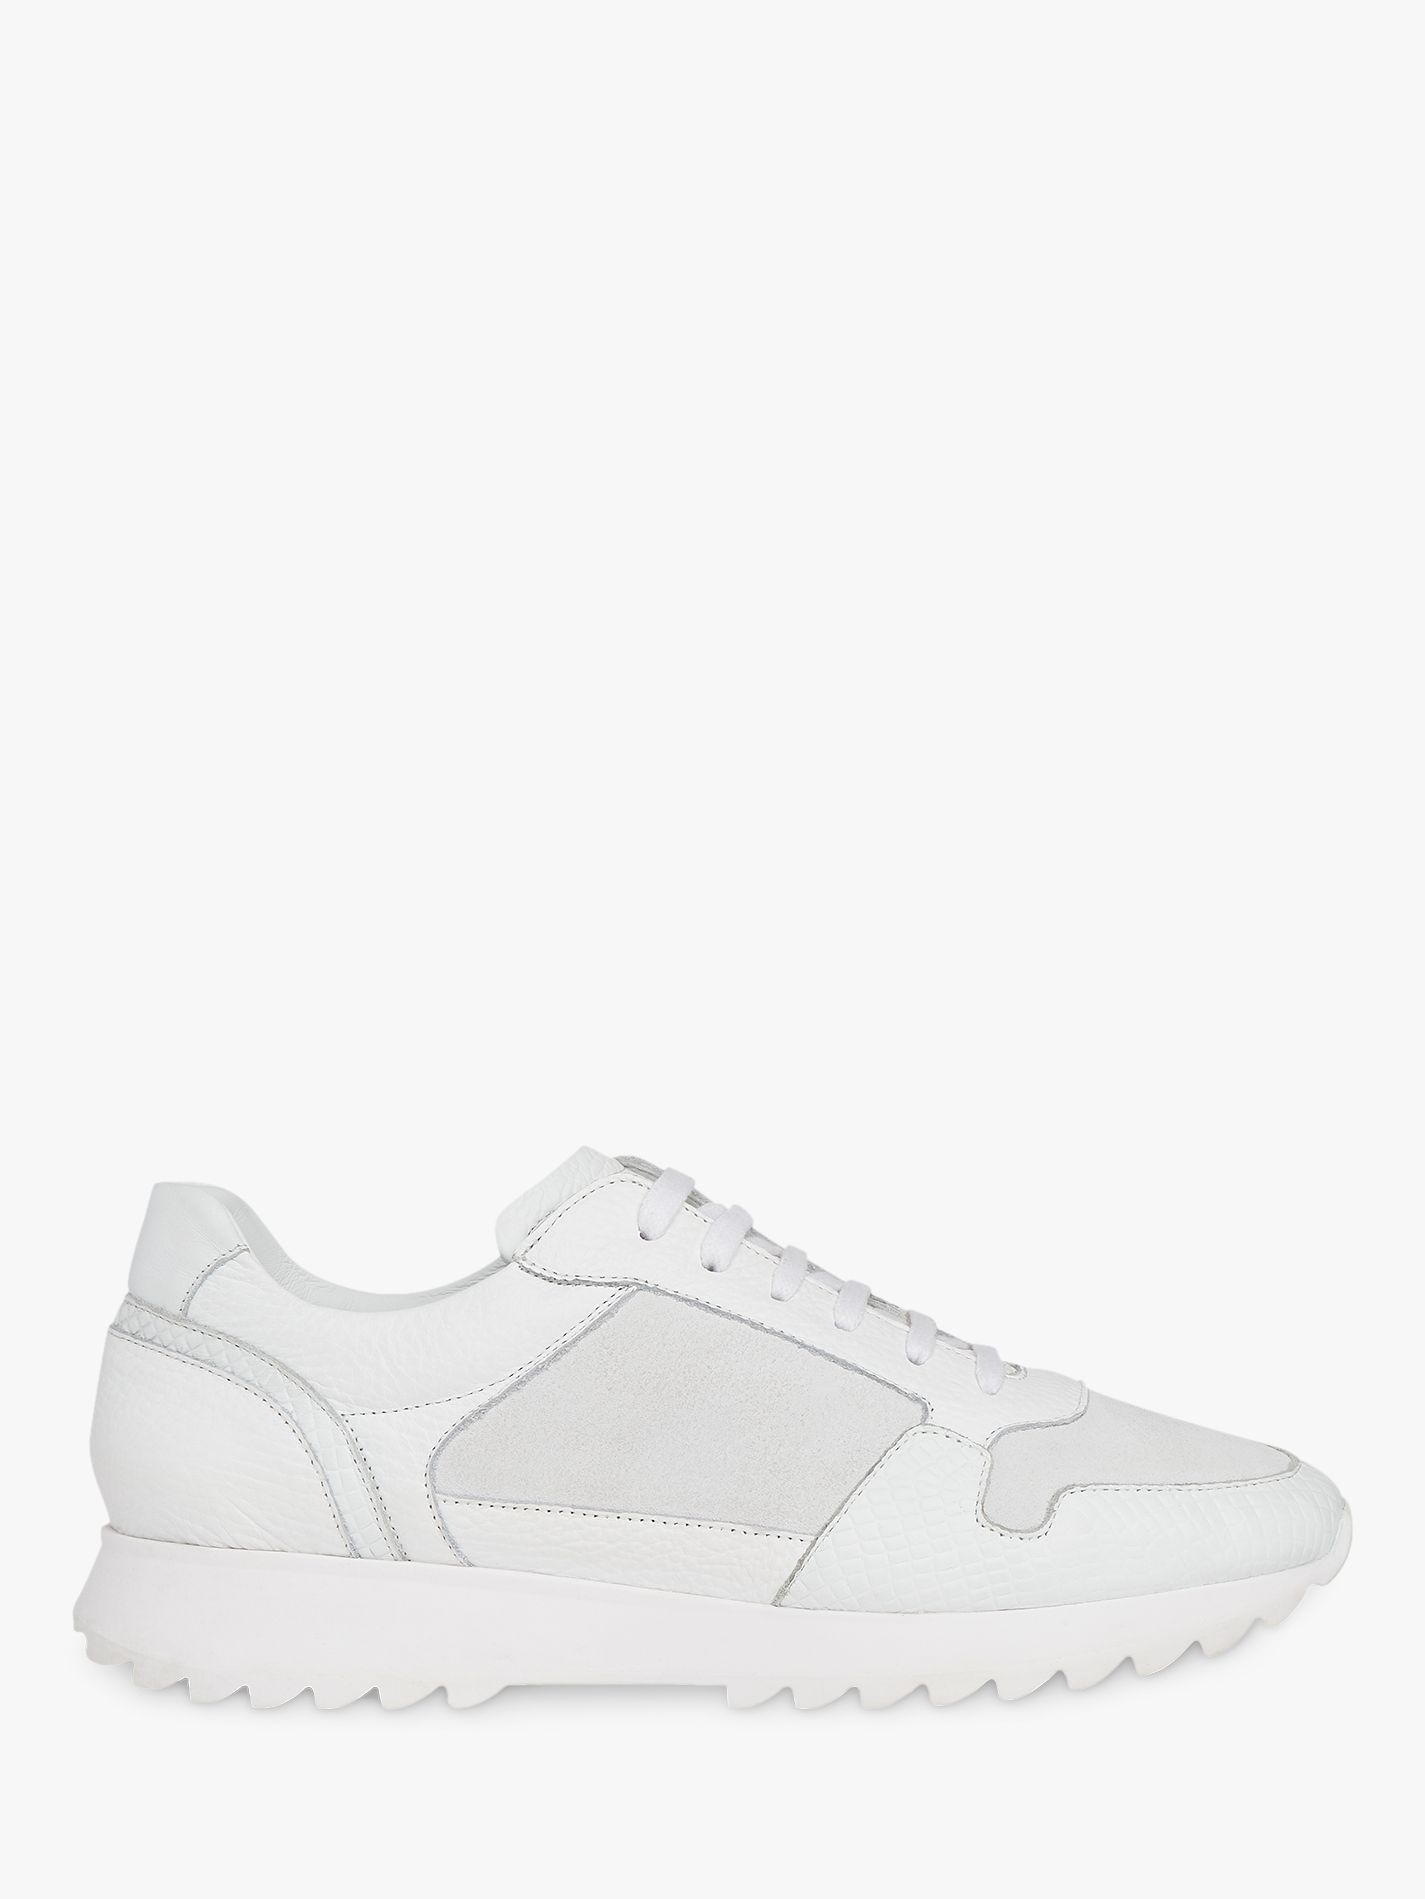 Whistles Broadwick Lace Up Trainers, White